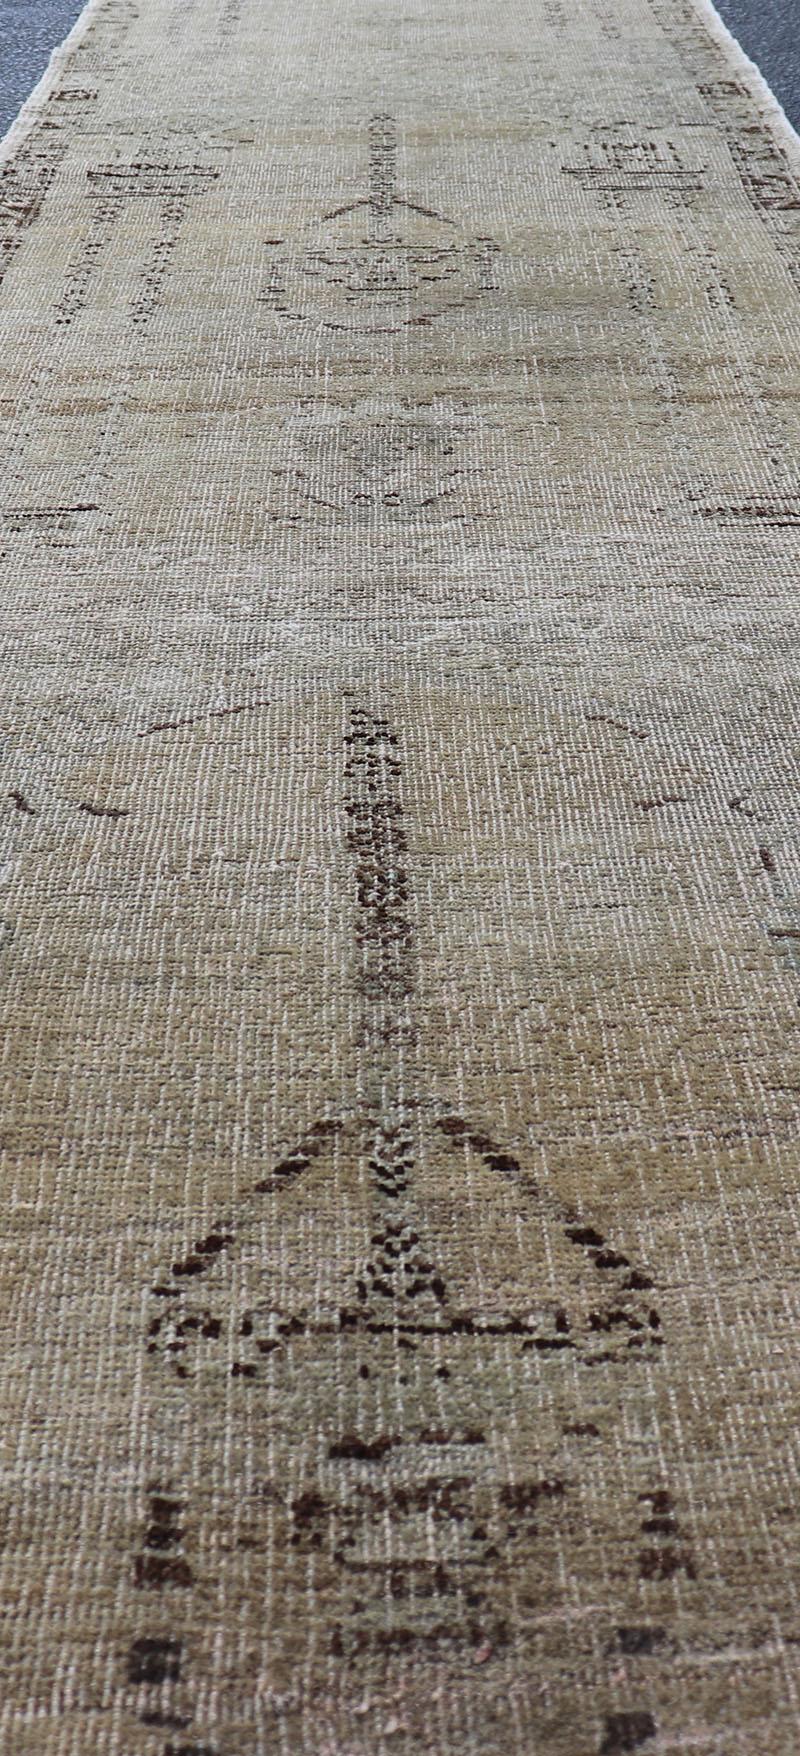 Skinny Long Turkish Runner with Floral Design in Taupe, Gray, and Brown For Sale 1